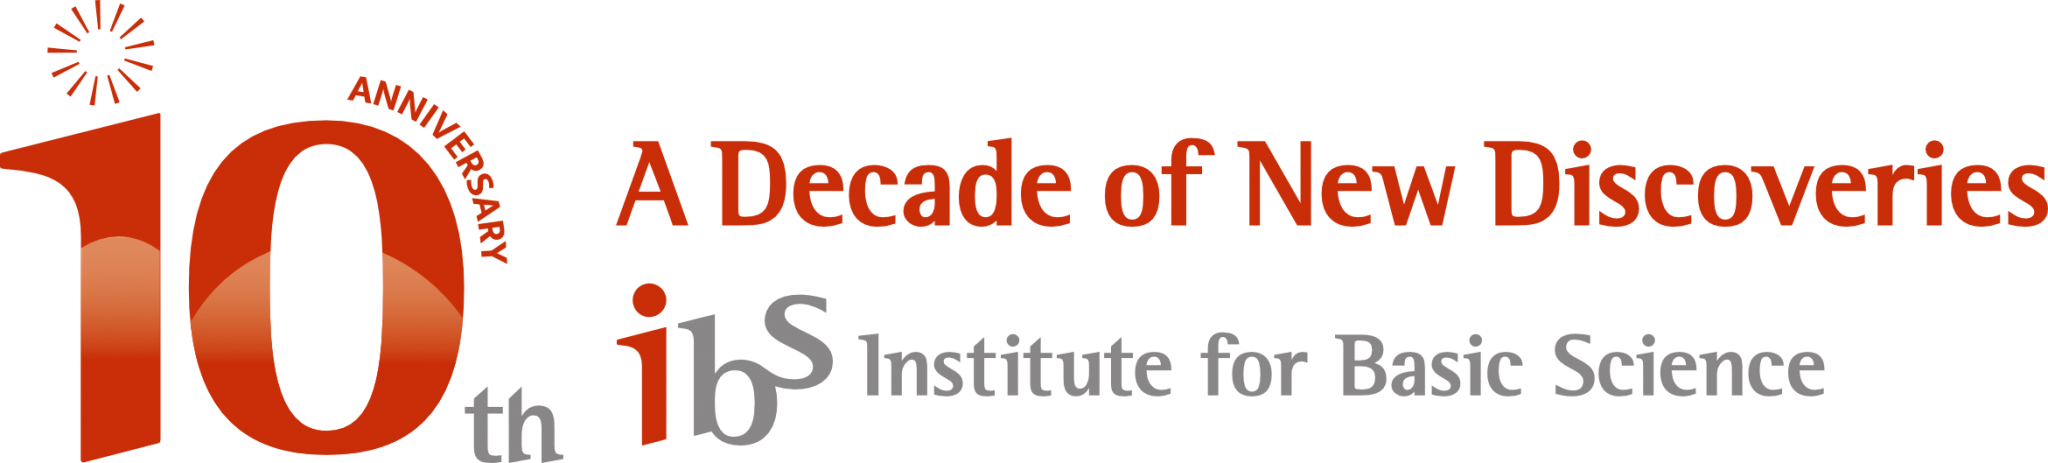 10th ANNIVERSARY A Decade of New Discoveries ibs Institute for Basic Science